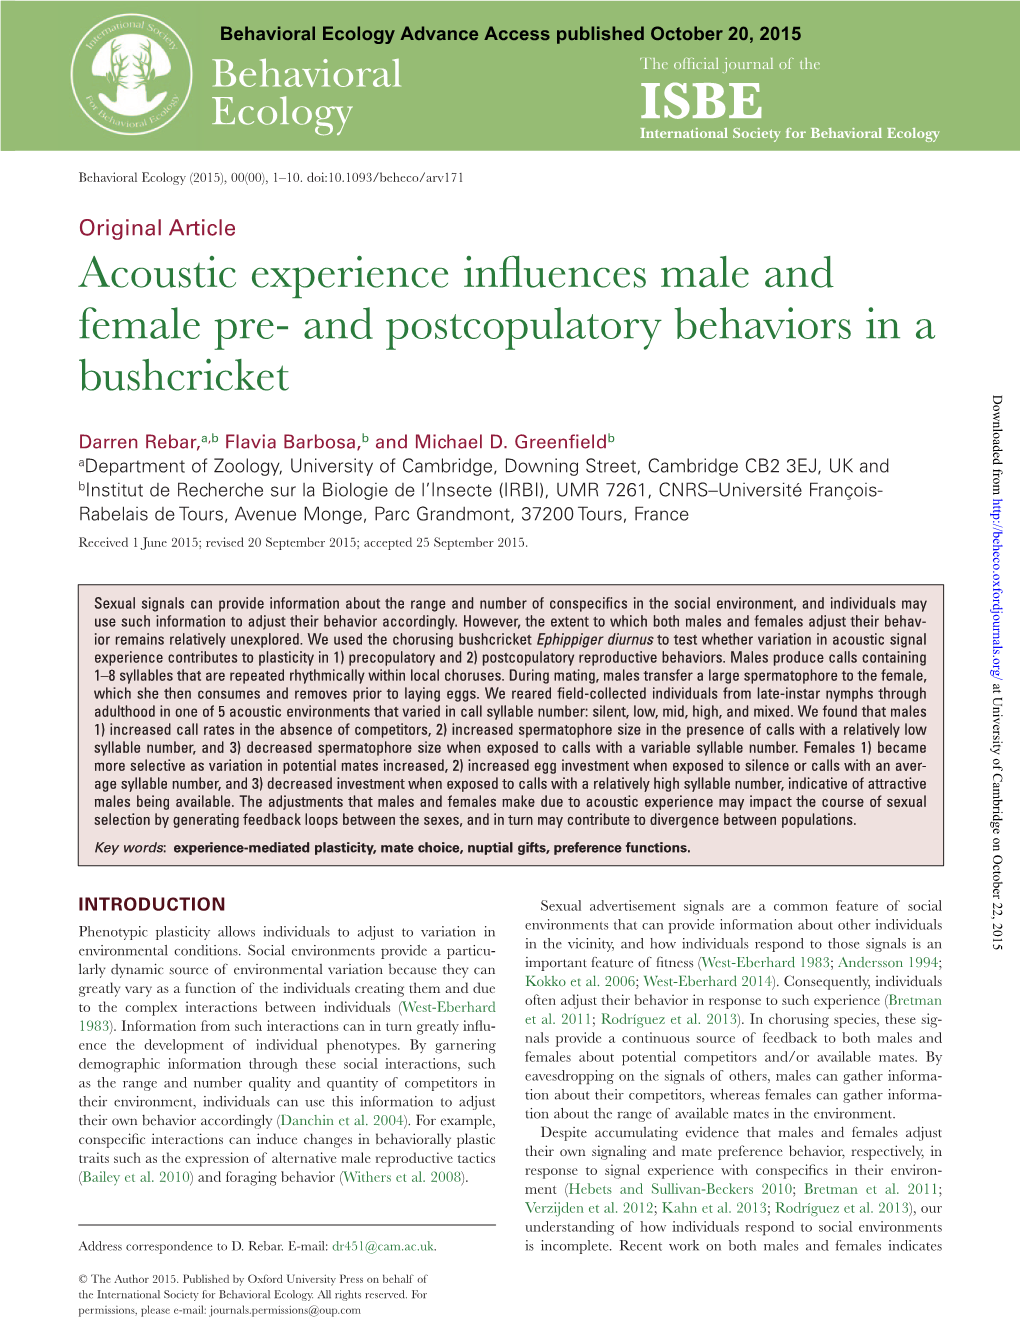 Acoustic Experience Influences Male and Female Pre- and Postcopulatory Behaviors in A